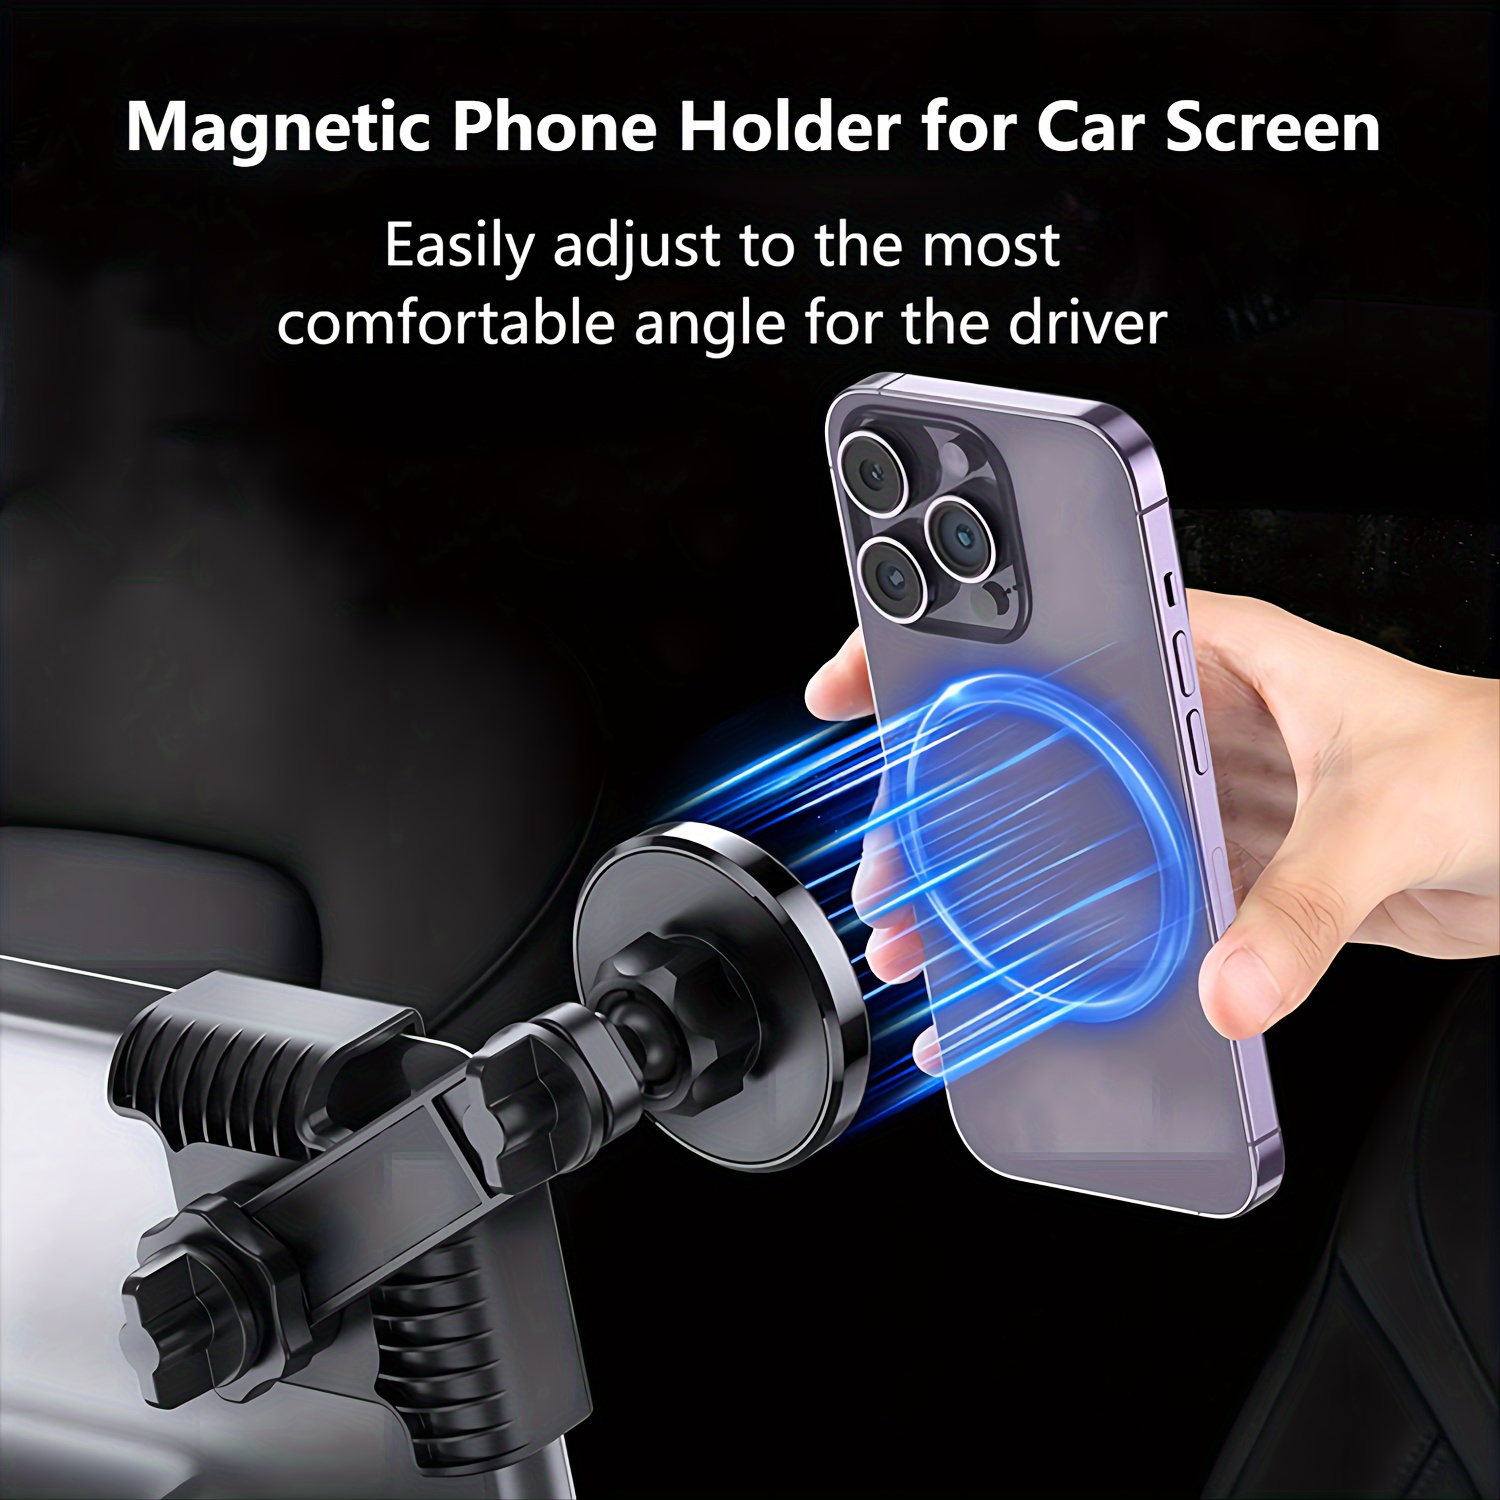 

Magnetic Phone Holder For Tesla And Y, Adjustable Car Screen Mount With Strong Built-in Magnets, Durable Pc Material